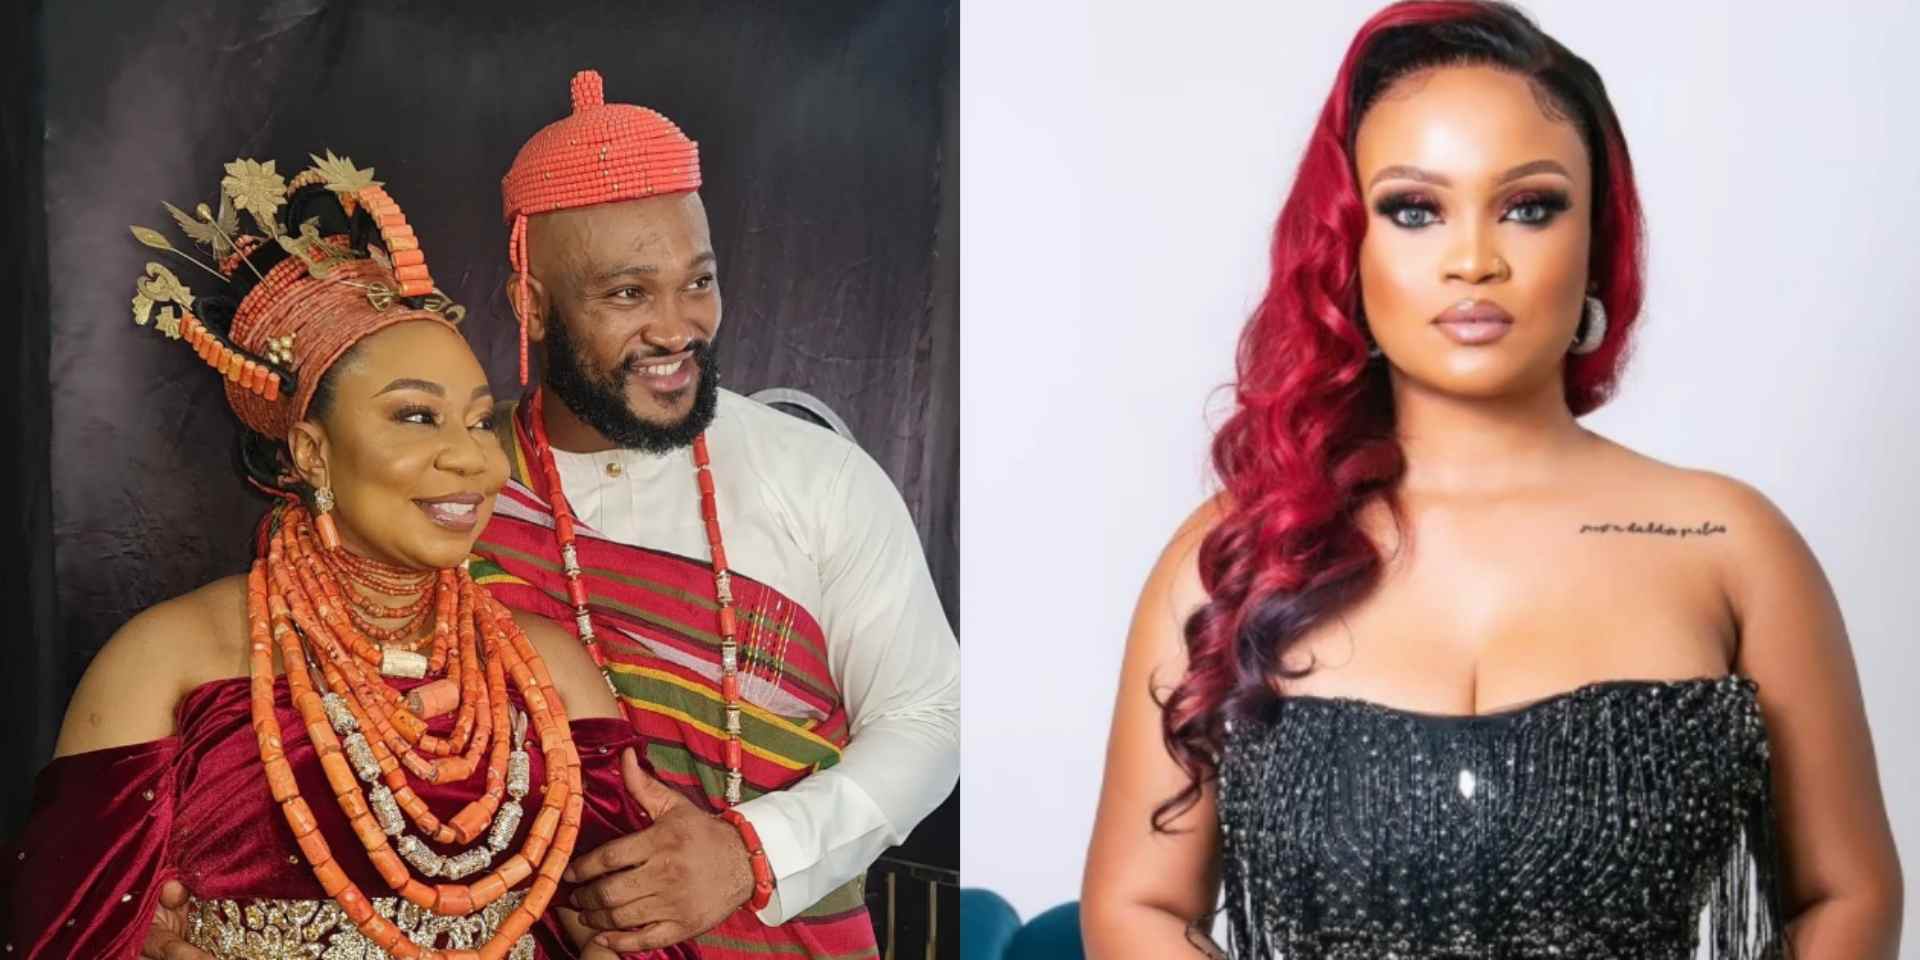 "He left you to marry a better woman, don't wet your pillows" - Trolls taunt Maureen Esisi after her ex-husband, Blossom Chukwujekwu remarried; she reacts